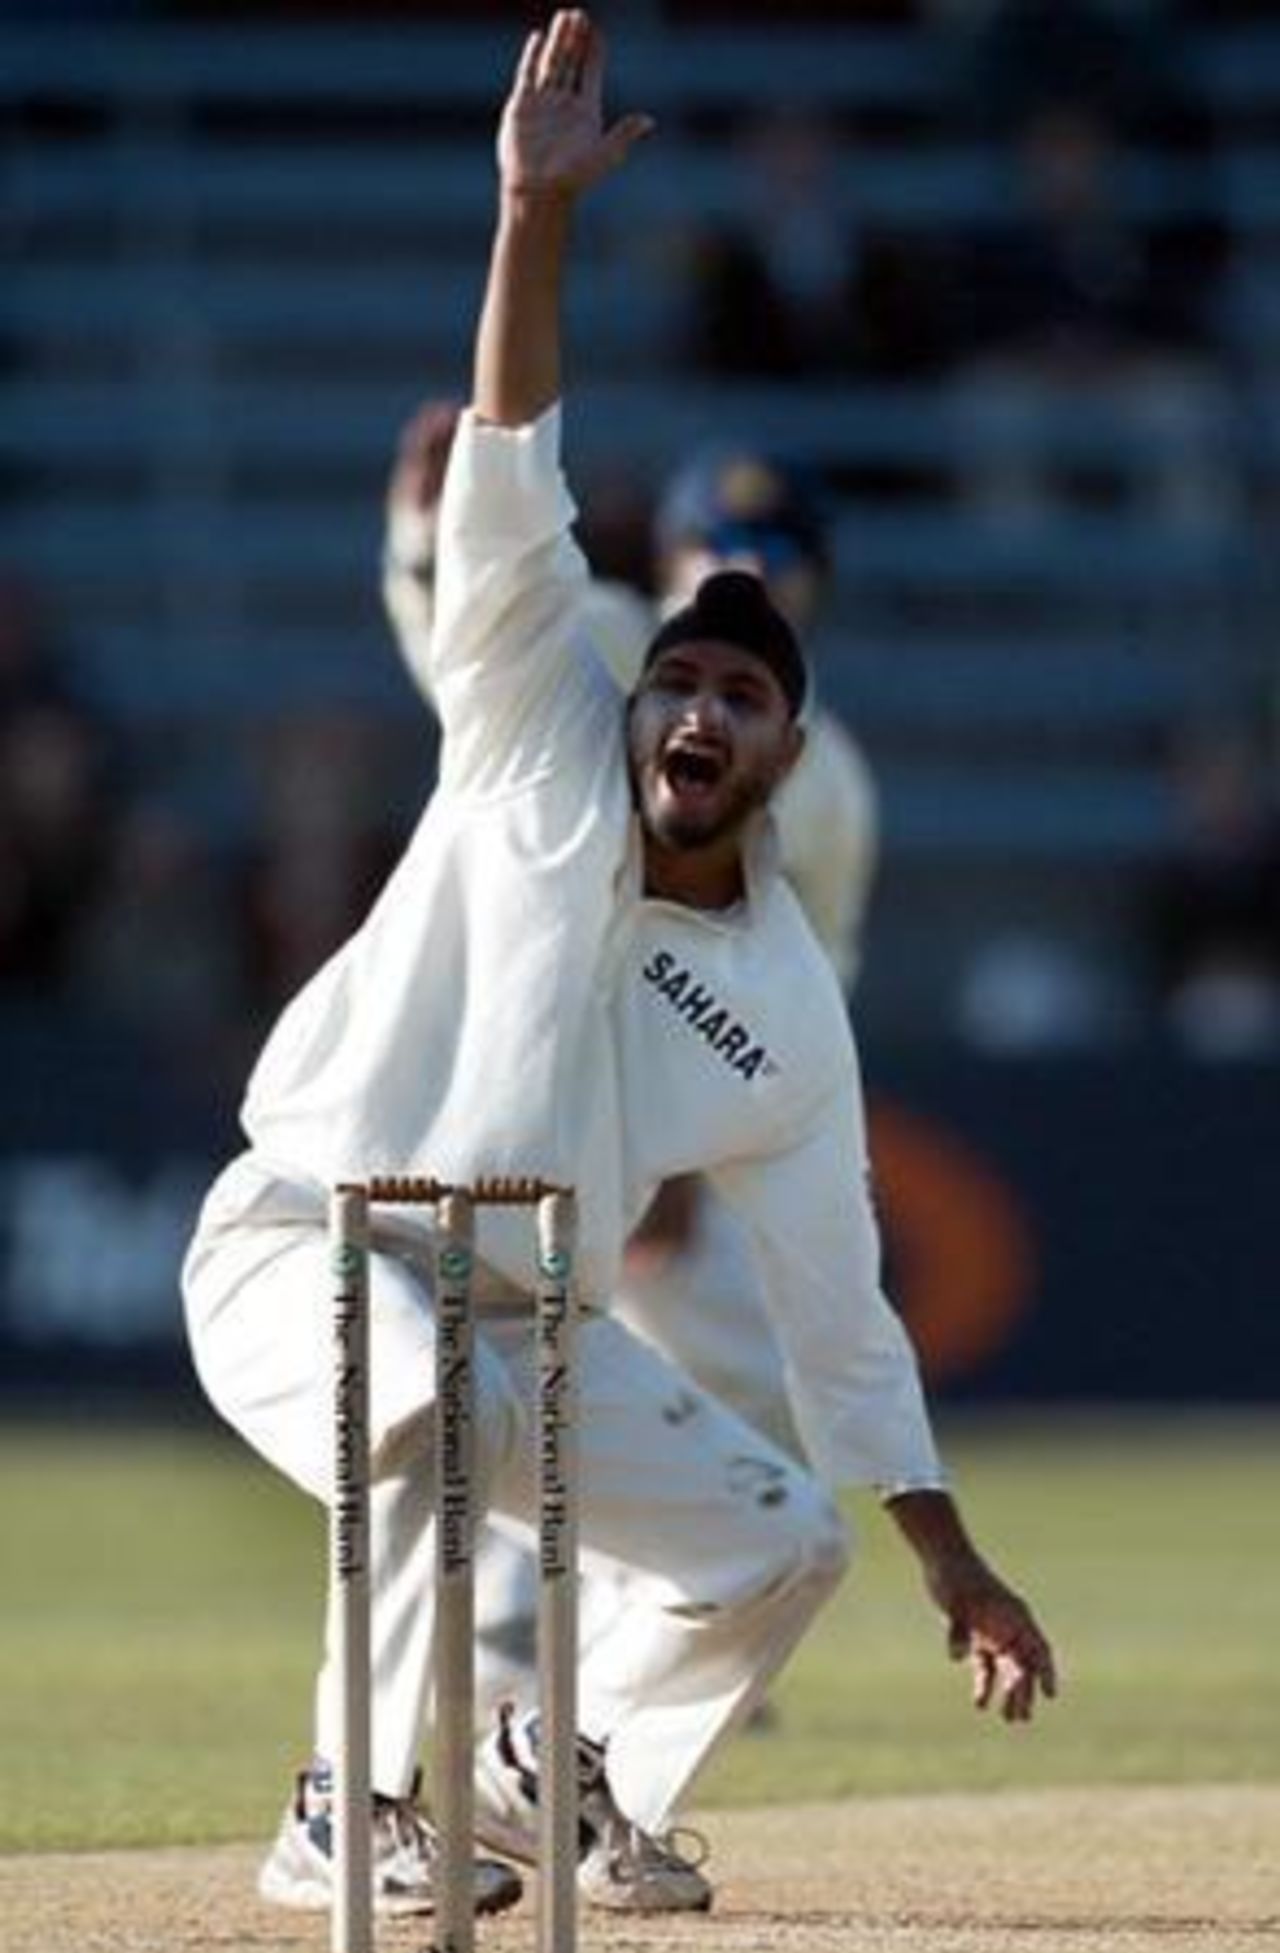 Indian bowler Harbhajan Singh unsuccessfully appeals for lbw against New Zealand batsman Jacob Oram during his spell of 2-22 from 13 overs on the second day. 1st Test: New Zealand v India at Basin Reserve, Wellington, 12-16 December 2002 (13 December 2002).